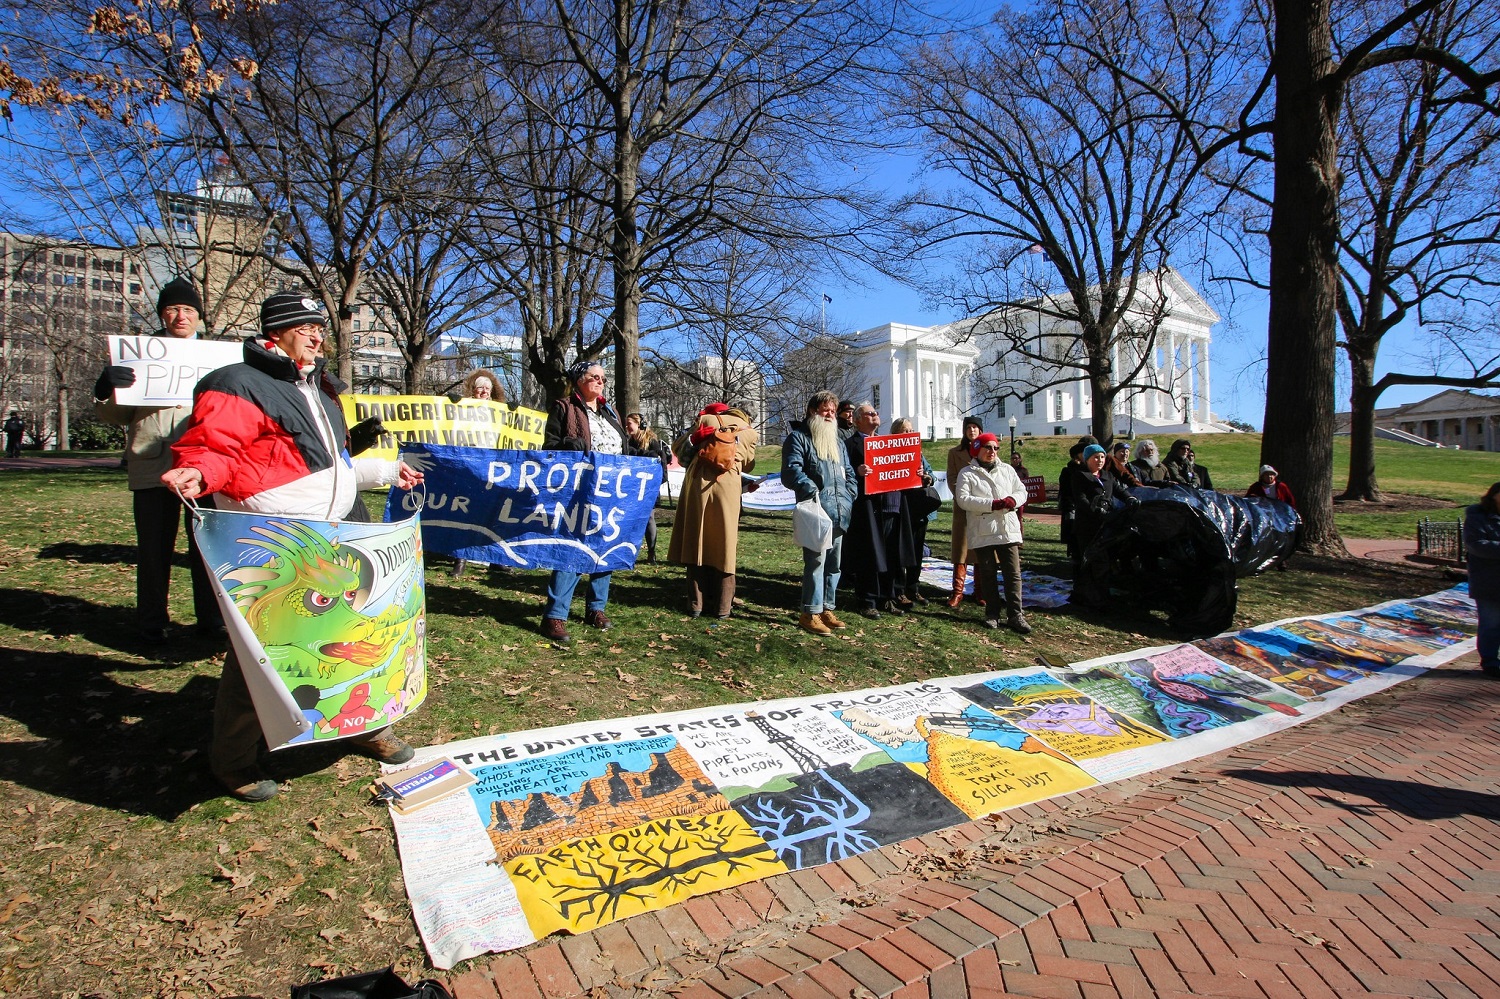 Natural gas pipeline opponents hold rally to urge legislators to repeal surveying law